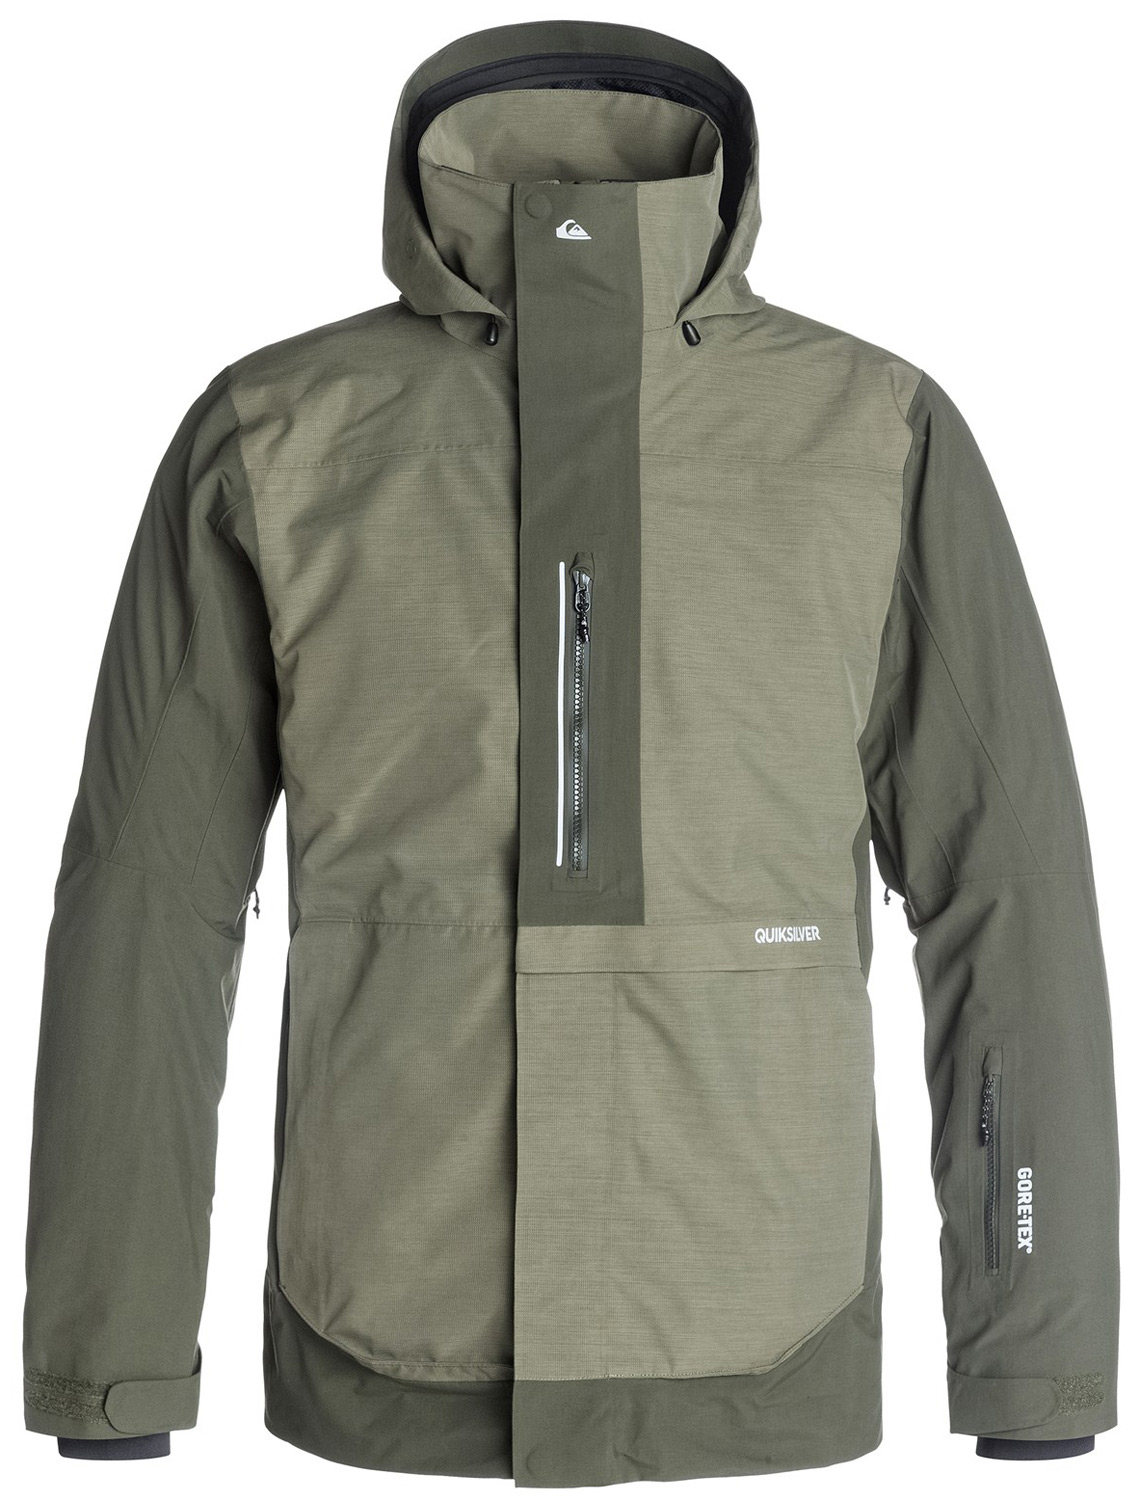 Quiksilver TR Exhibition Jacket Review - The Good Ride